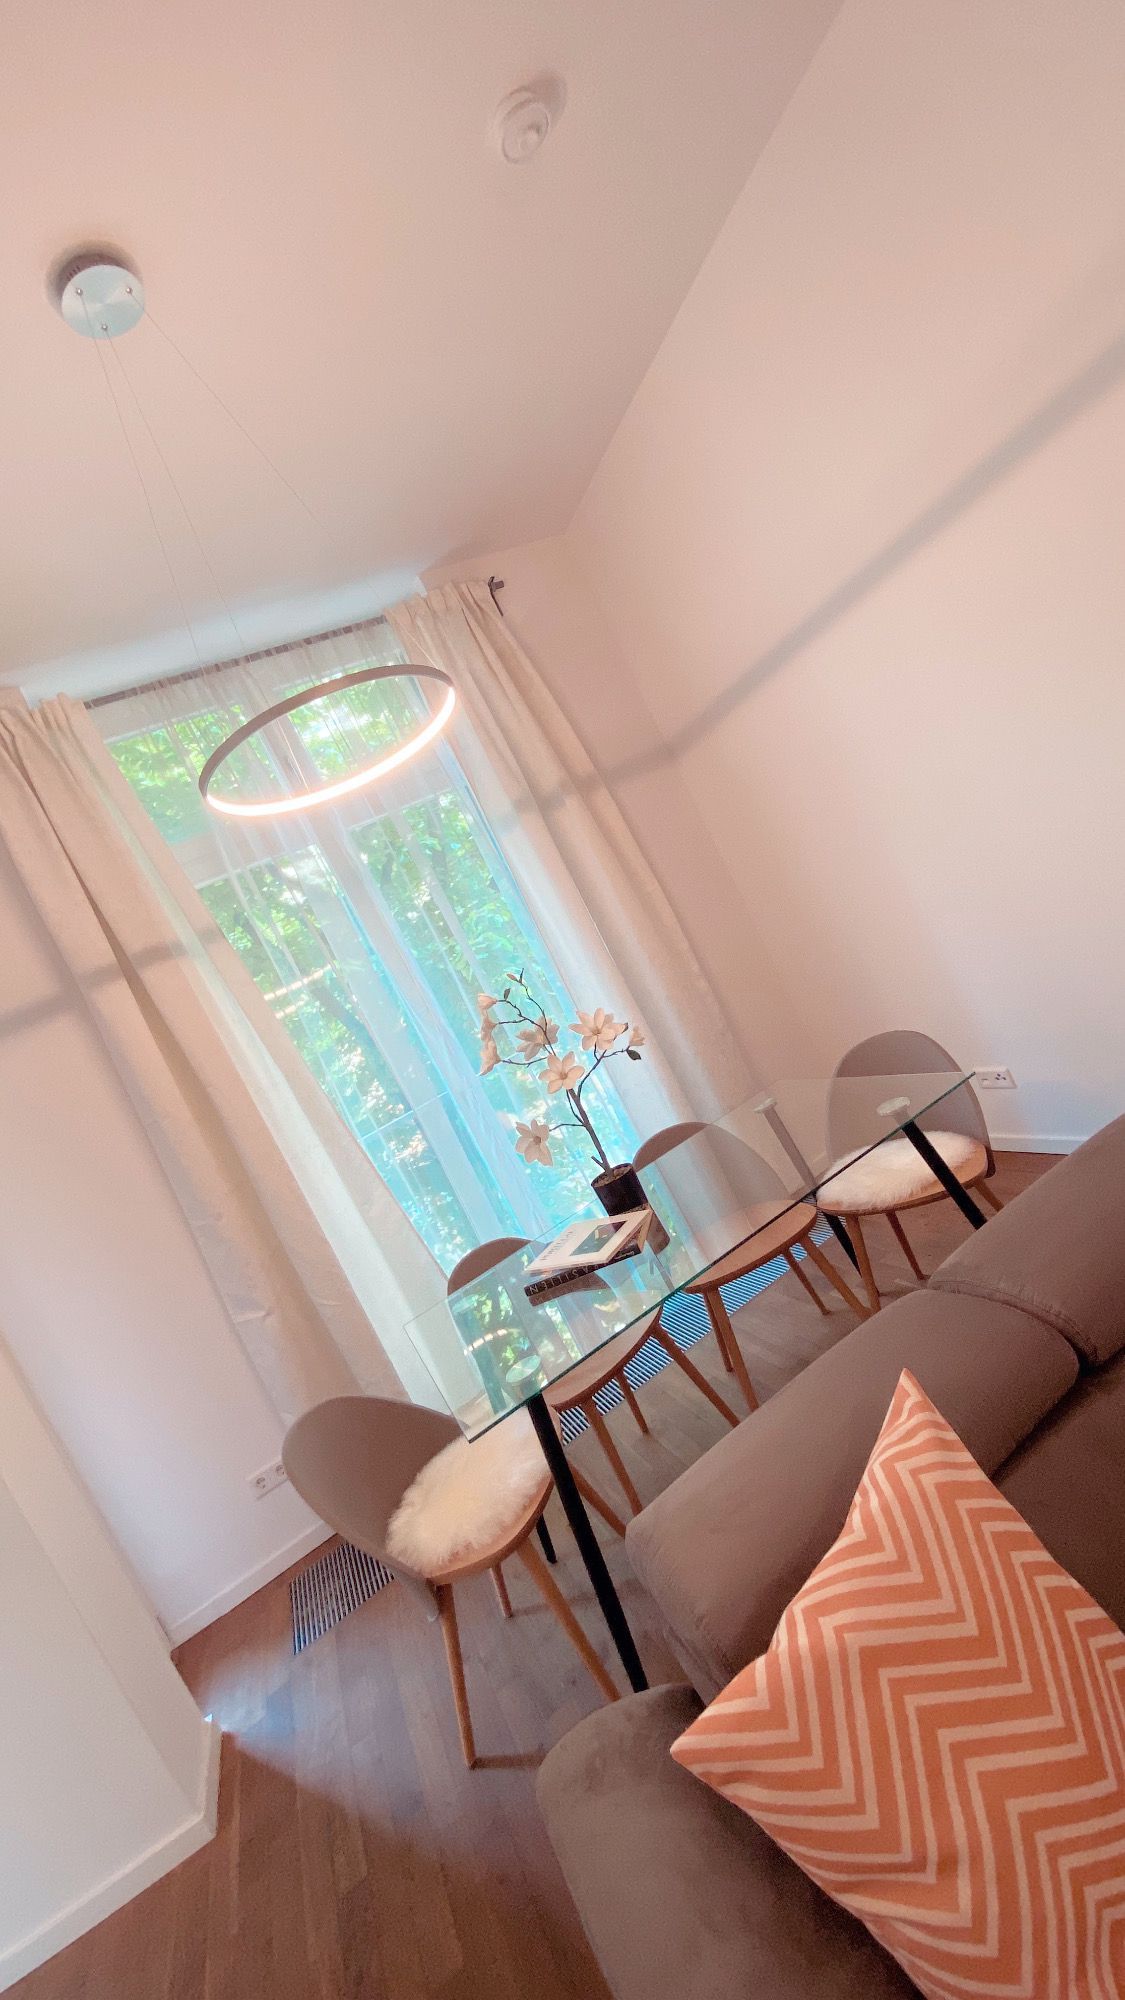 Exclusive apartment in the heart of Berlin including a garage parking space.